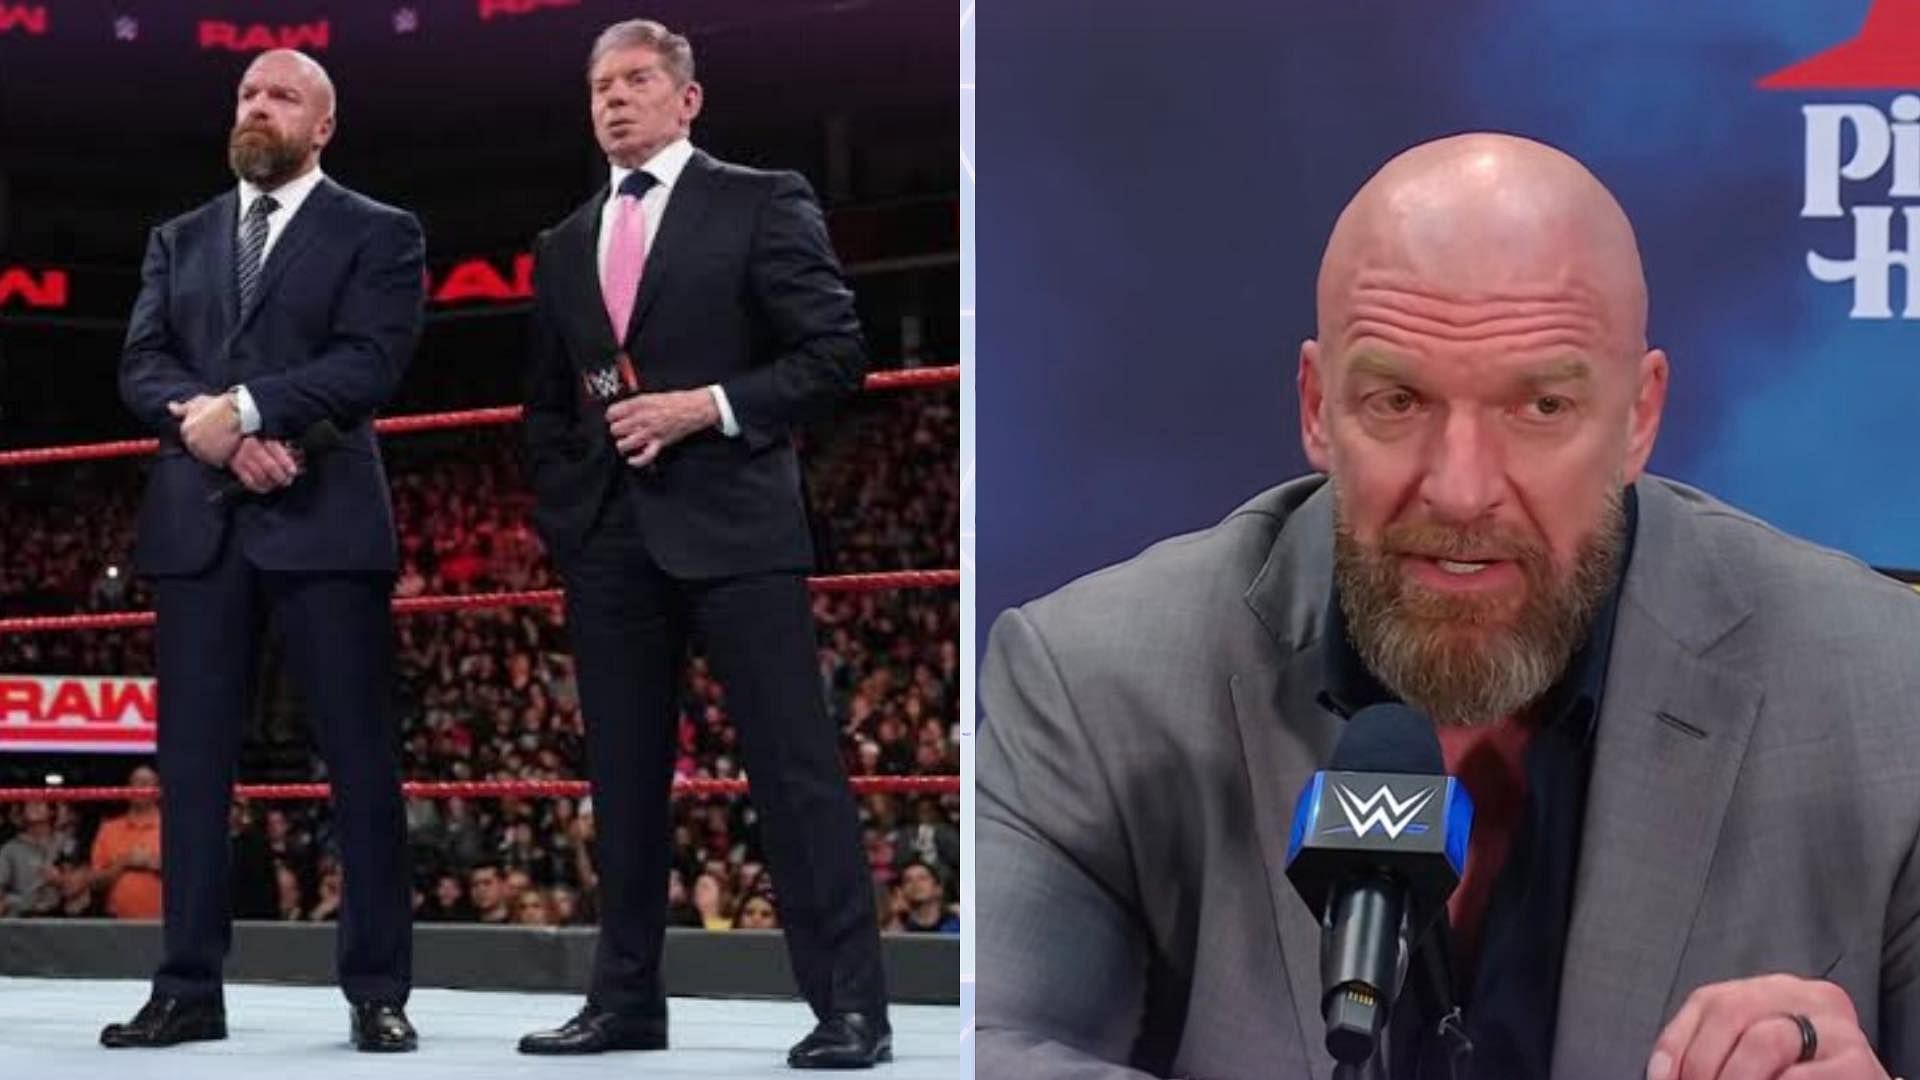 Triple H is currently the CCO of WWE and Vince McMahon is the co-founder